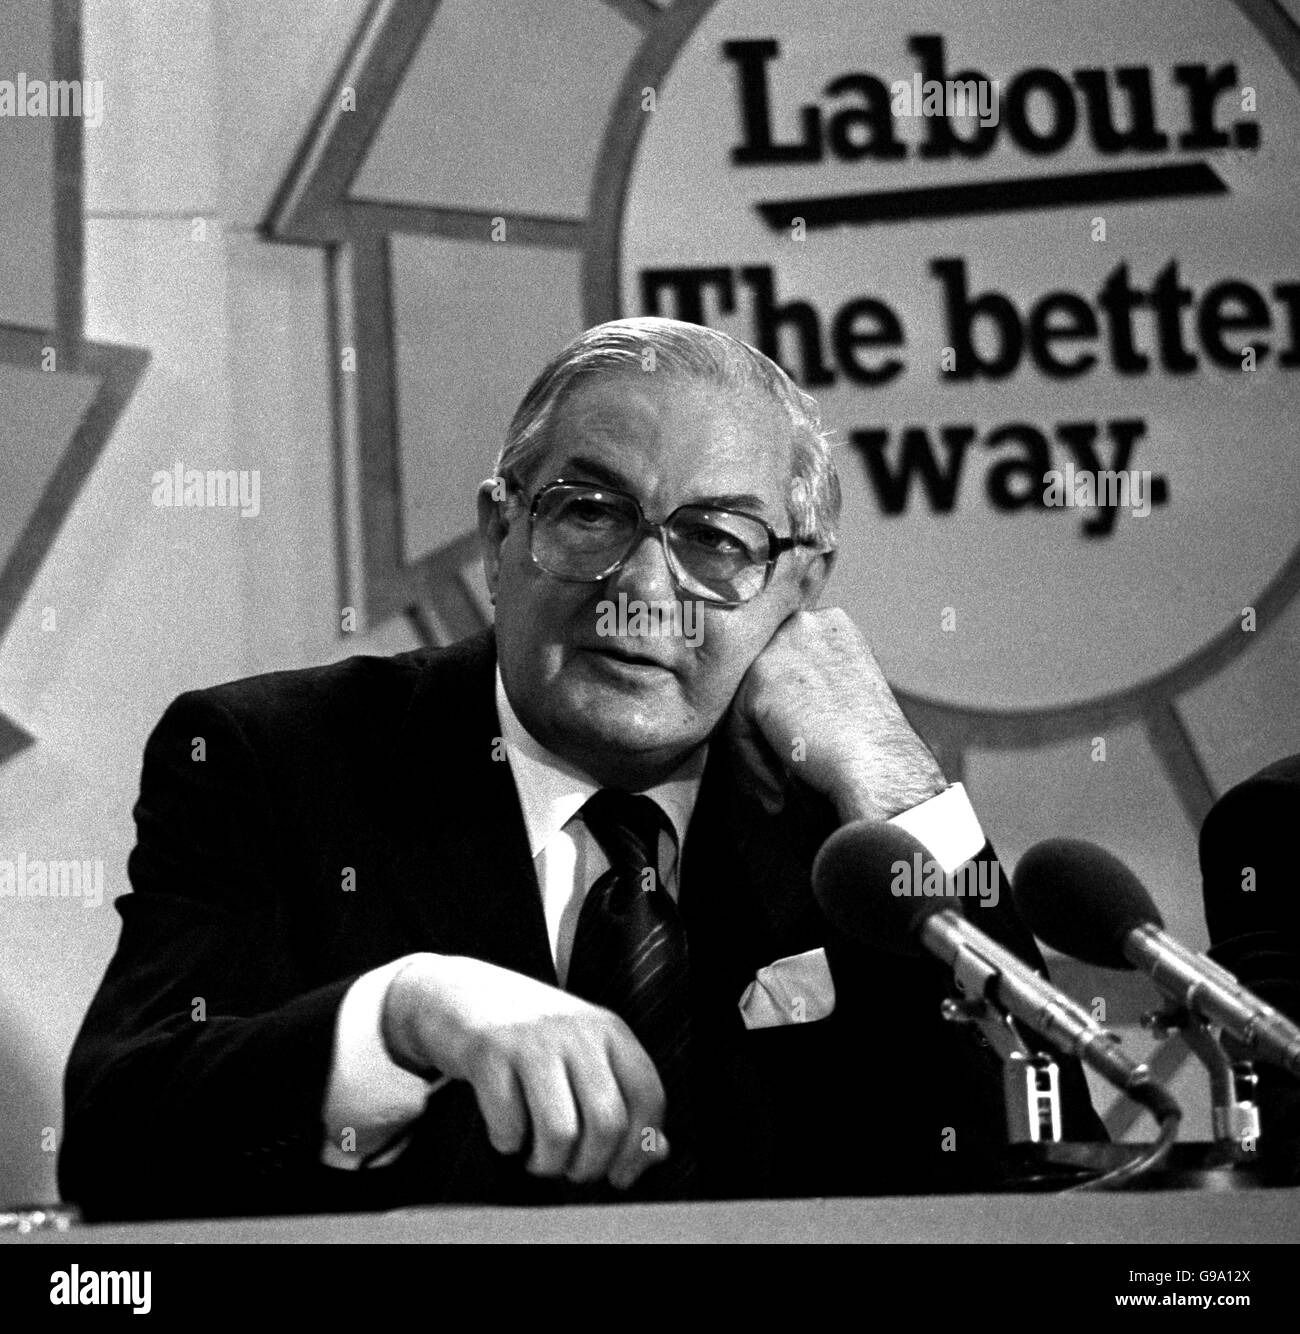 The Prime Minister, Mr James Callaghan at a press conference at Transport House in London, as the General Election enters its final week. Mr Callaghan issued a final message for Labour candidates in which he plugged LAbour's message that the Tories had'promised more then they can deliver'. Stock Photo